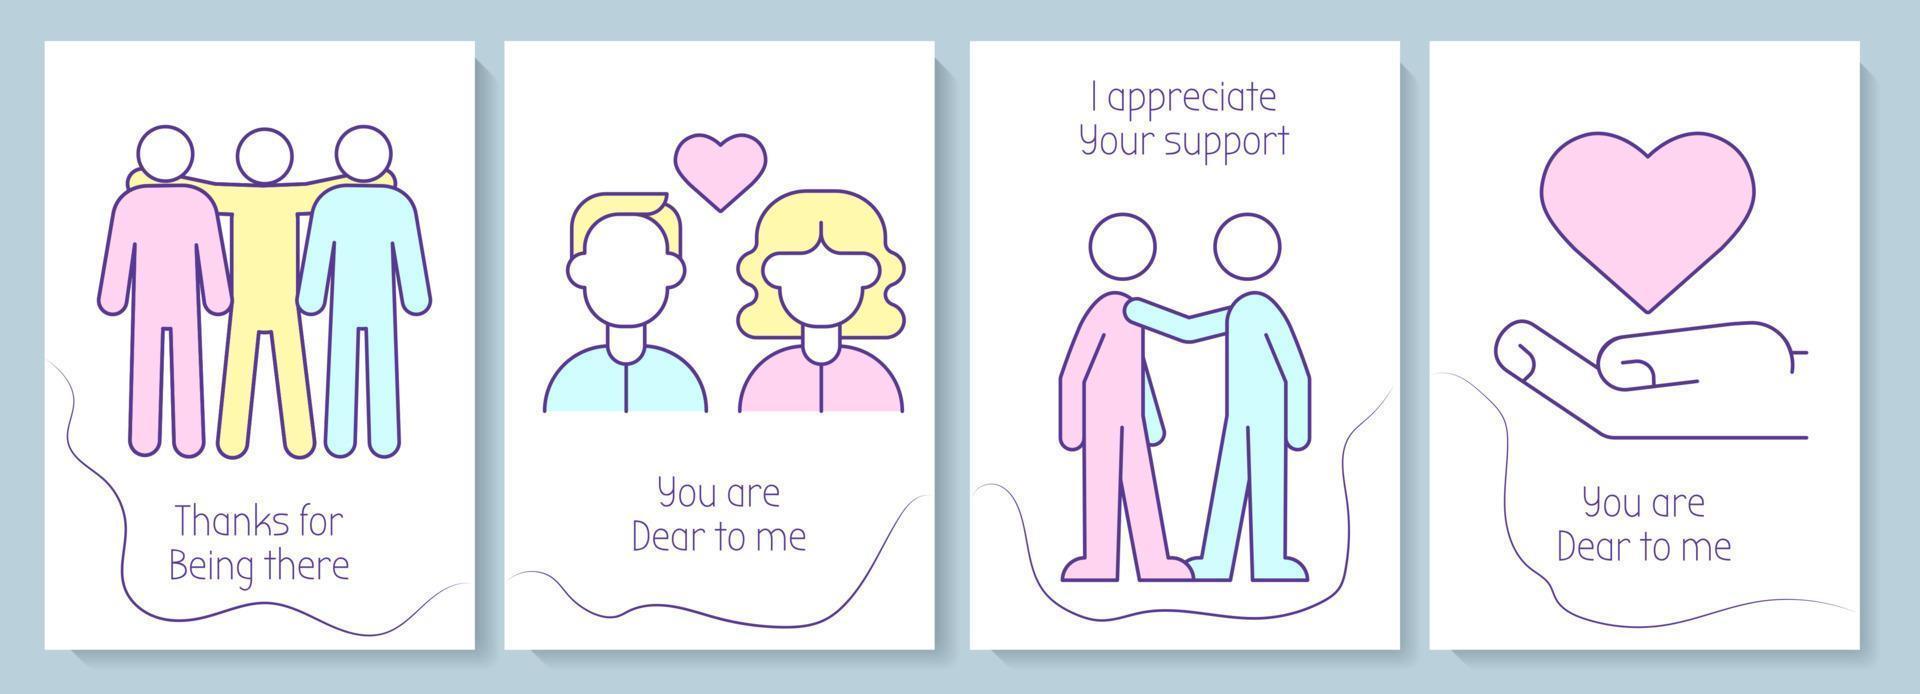 Appreciation greeting cards with color icon element set. To dear people. Postcard vector design. Decorative flyer with creative illustration. Notecard with congratulatory message on white